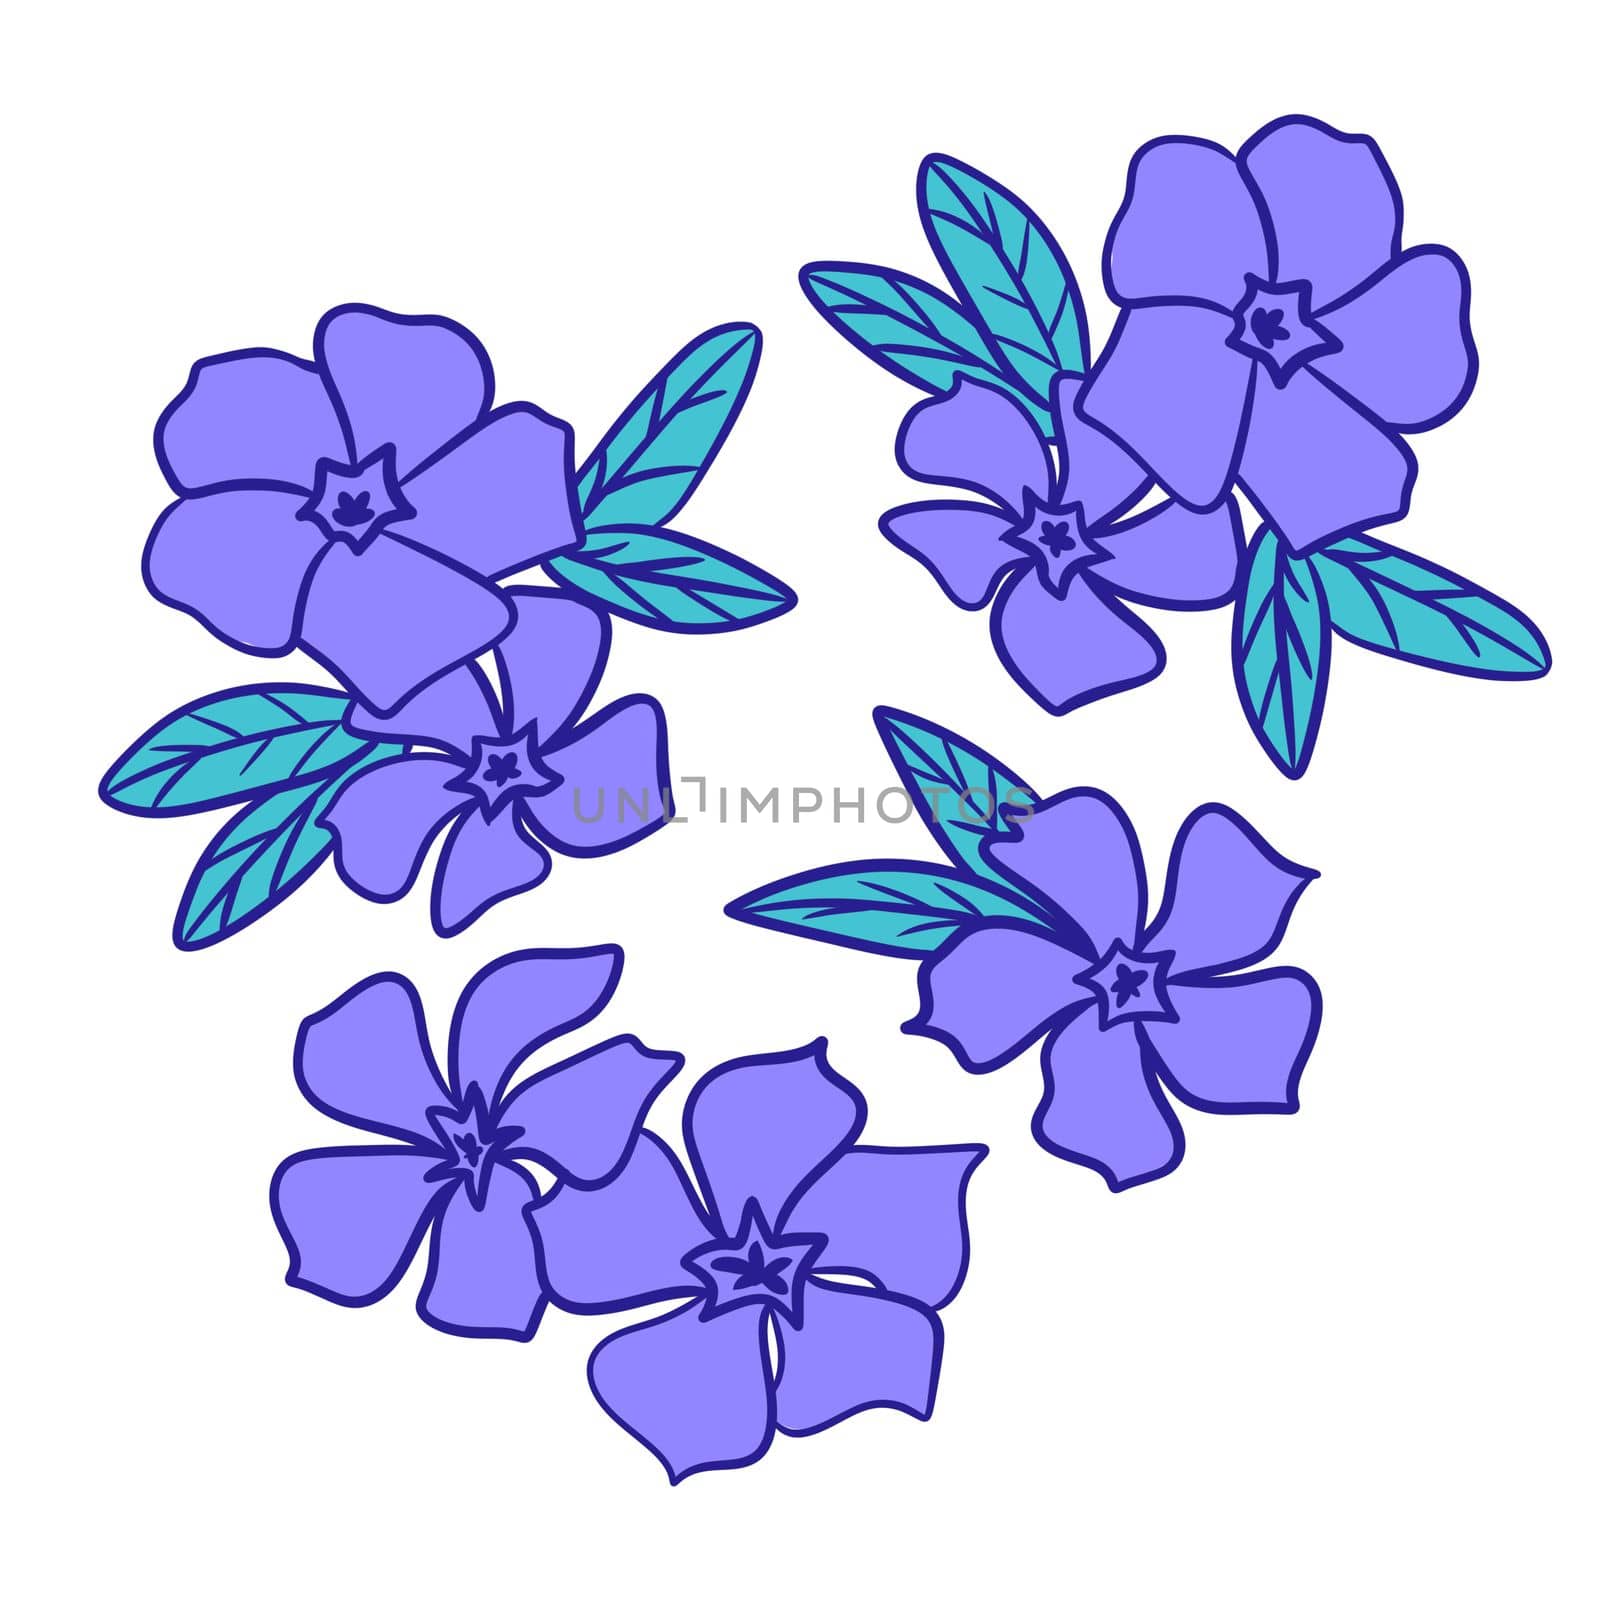 Hand drawn illustration of periwinkle blue violet flowers with green leaves. Natural wild forest flowers in floral decorative style, wood woodland nature plant, bloom blossom drawing leaf foliage